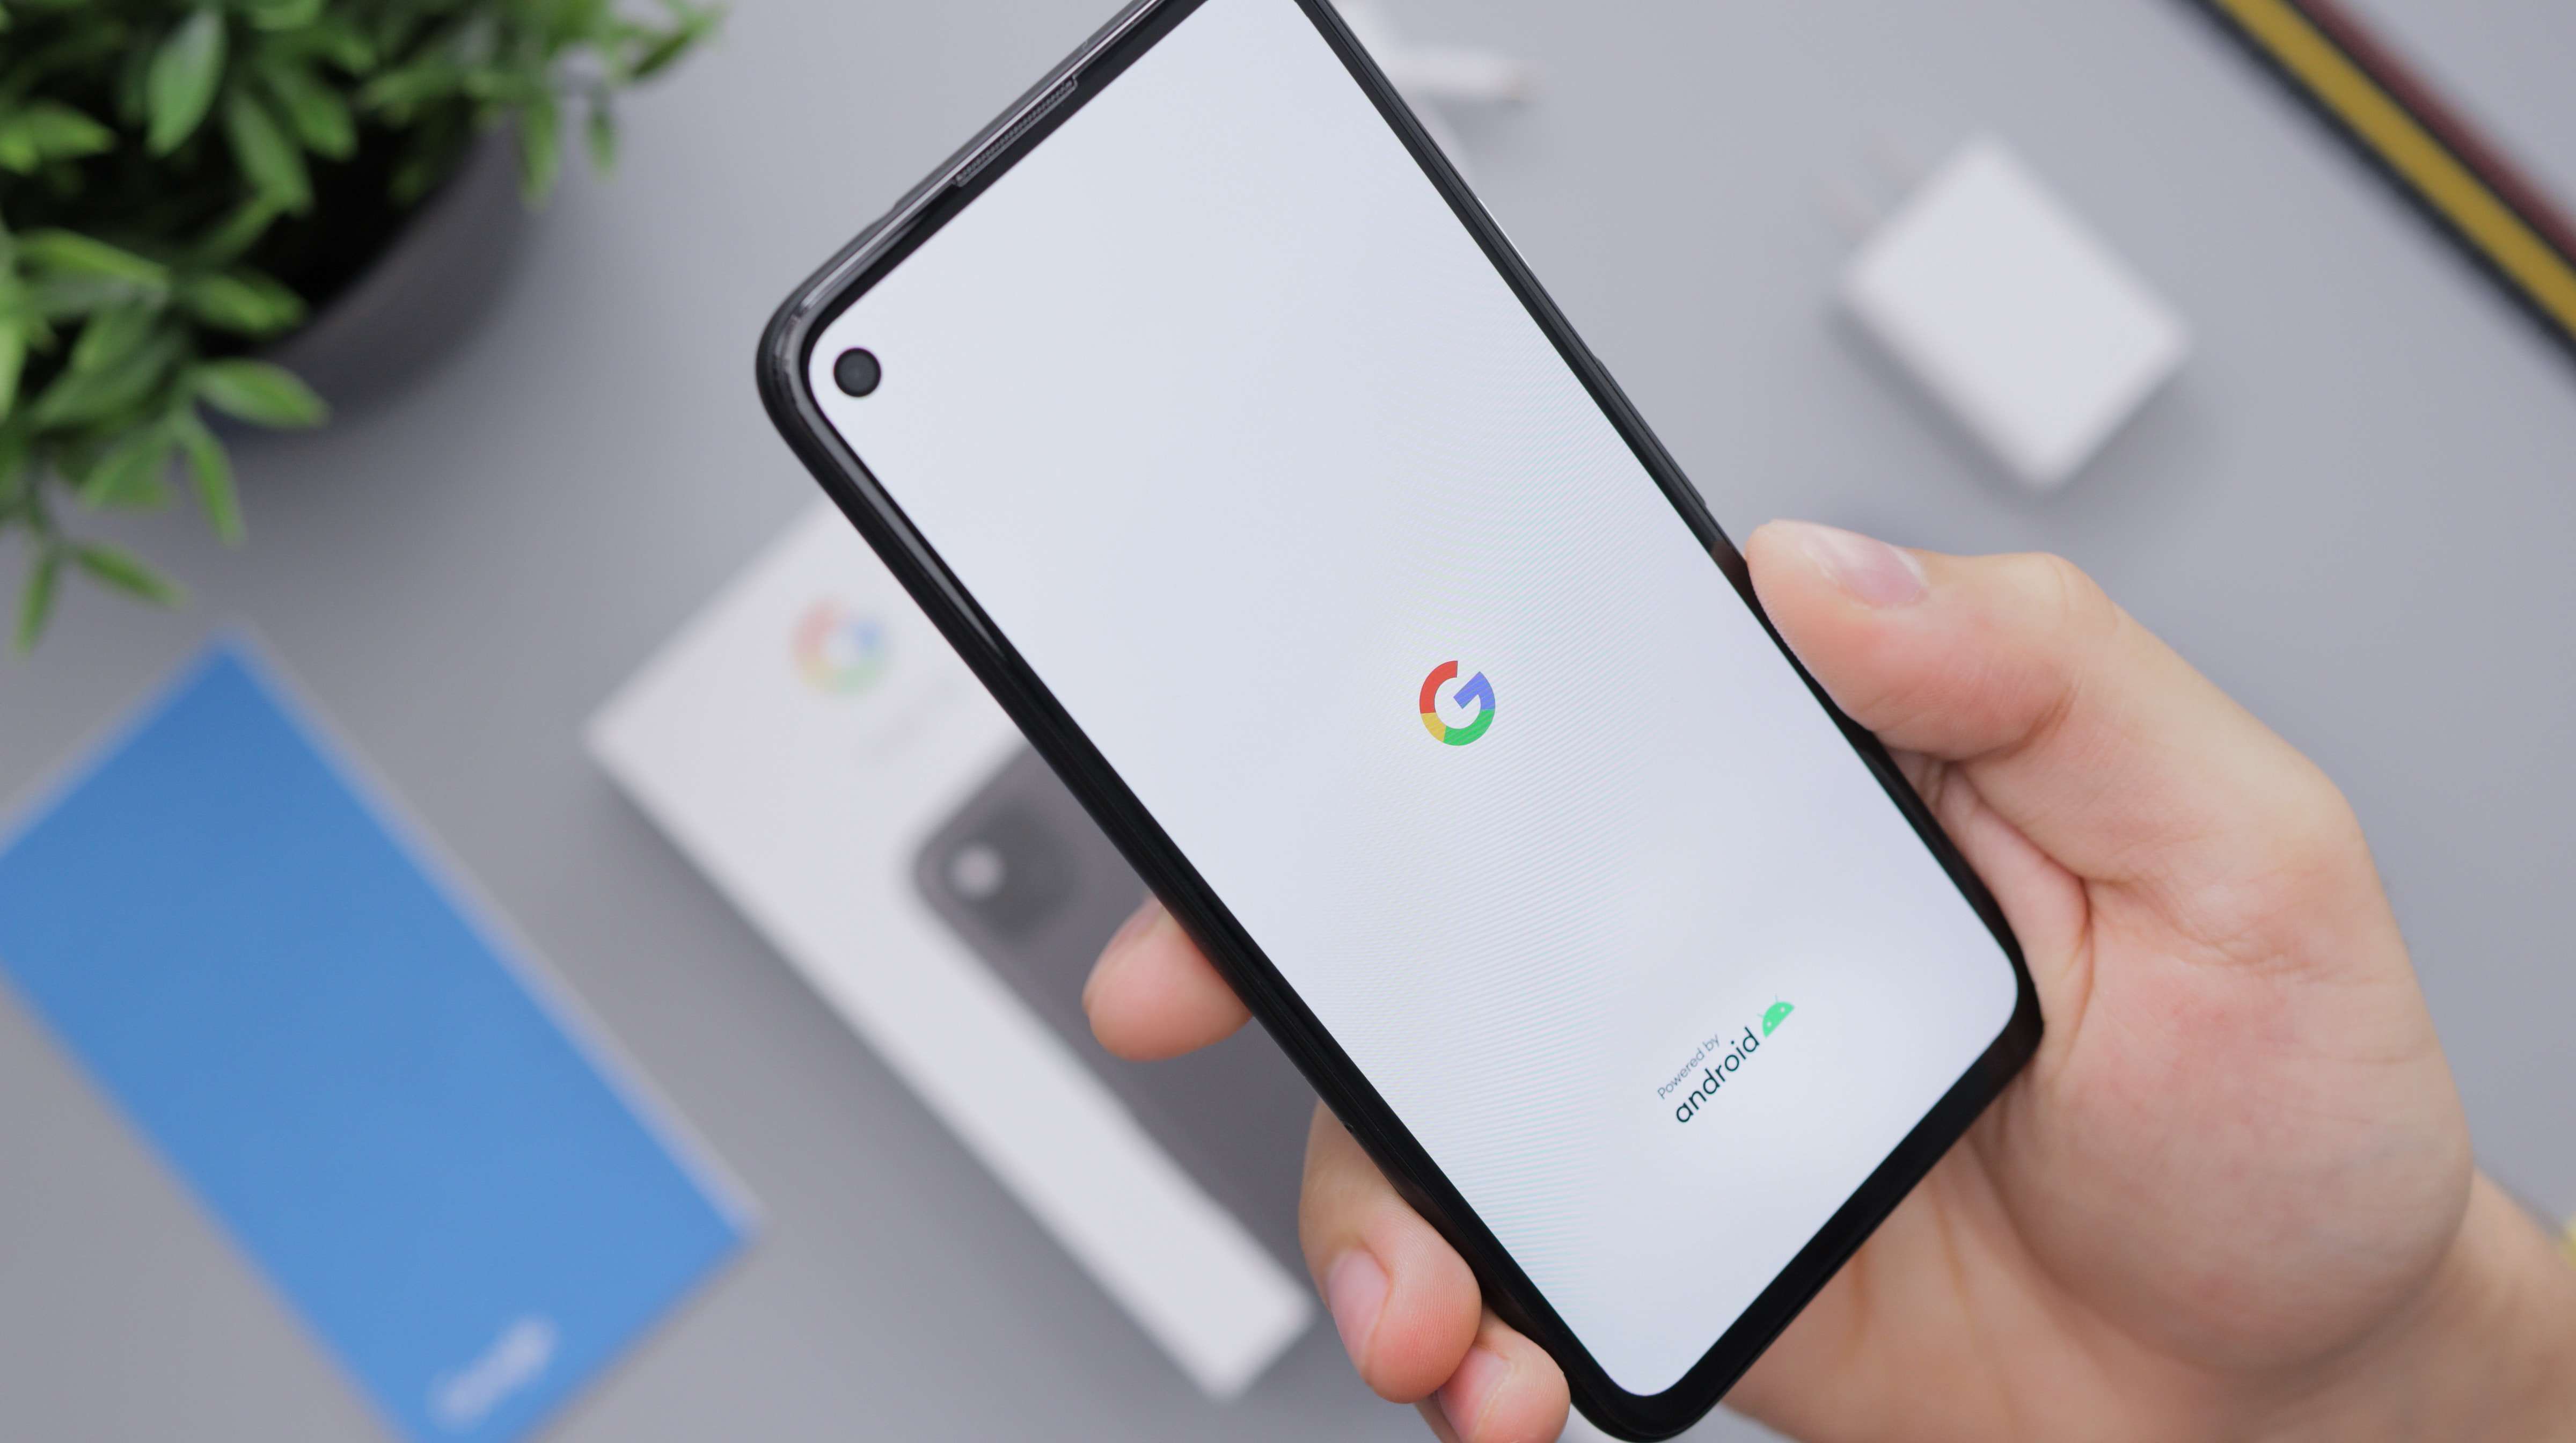 A cellphone with the Google logo